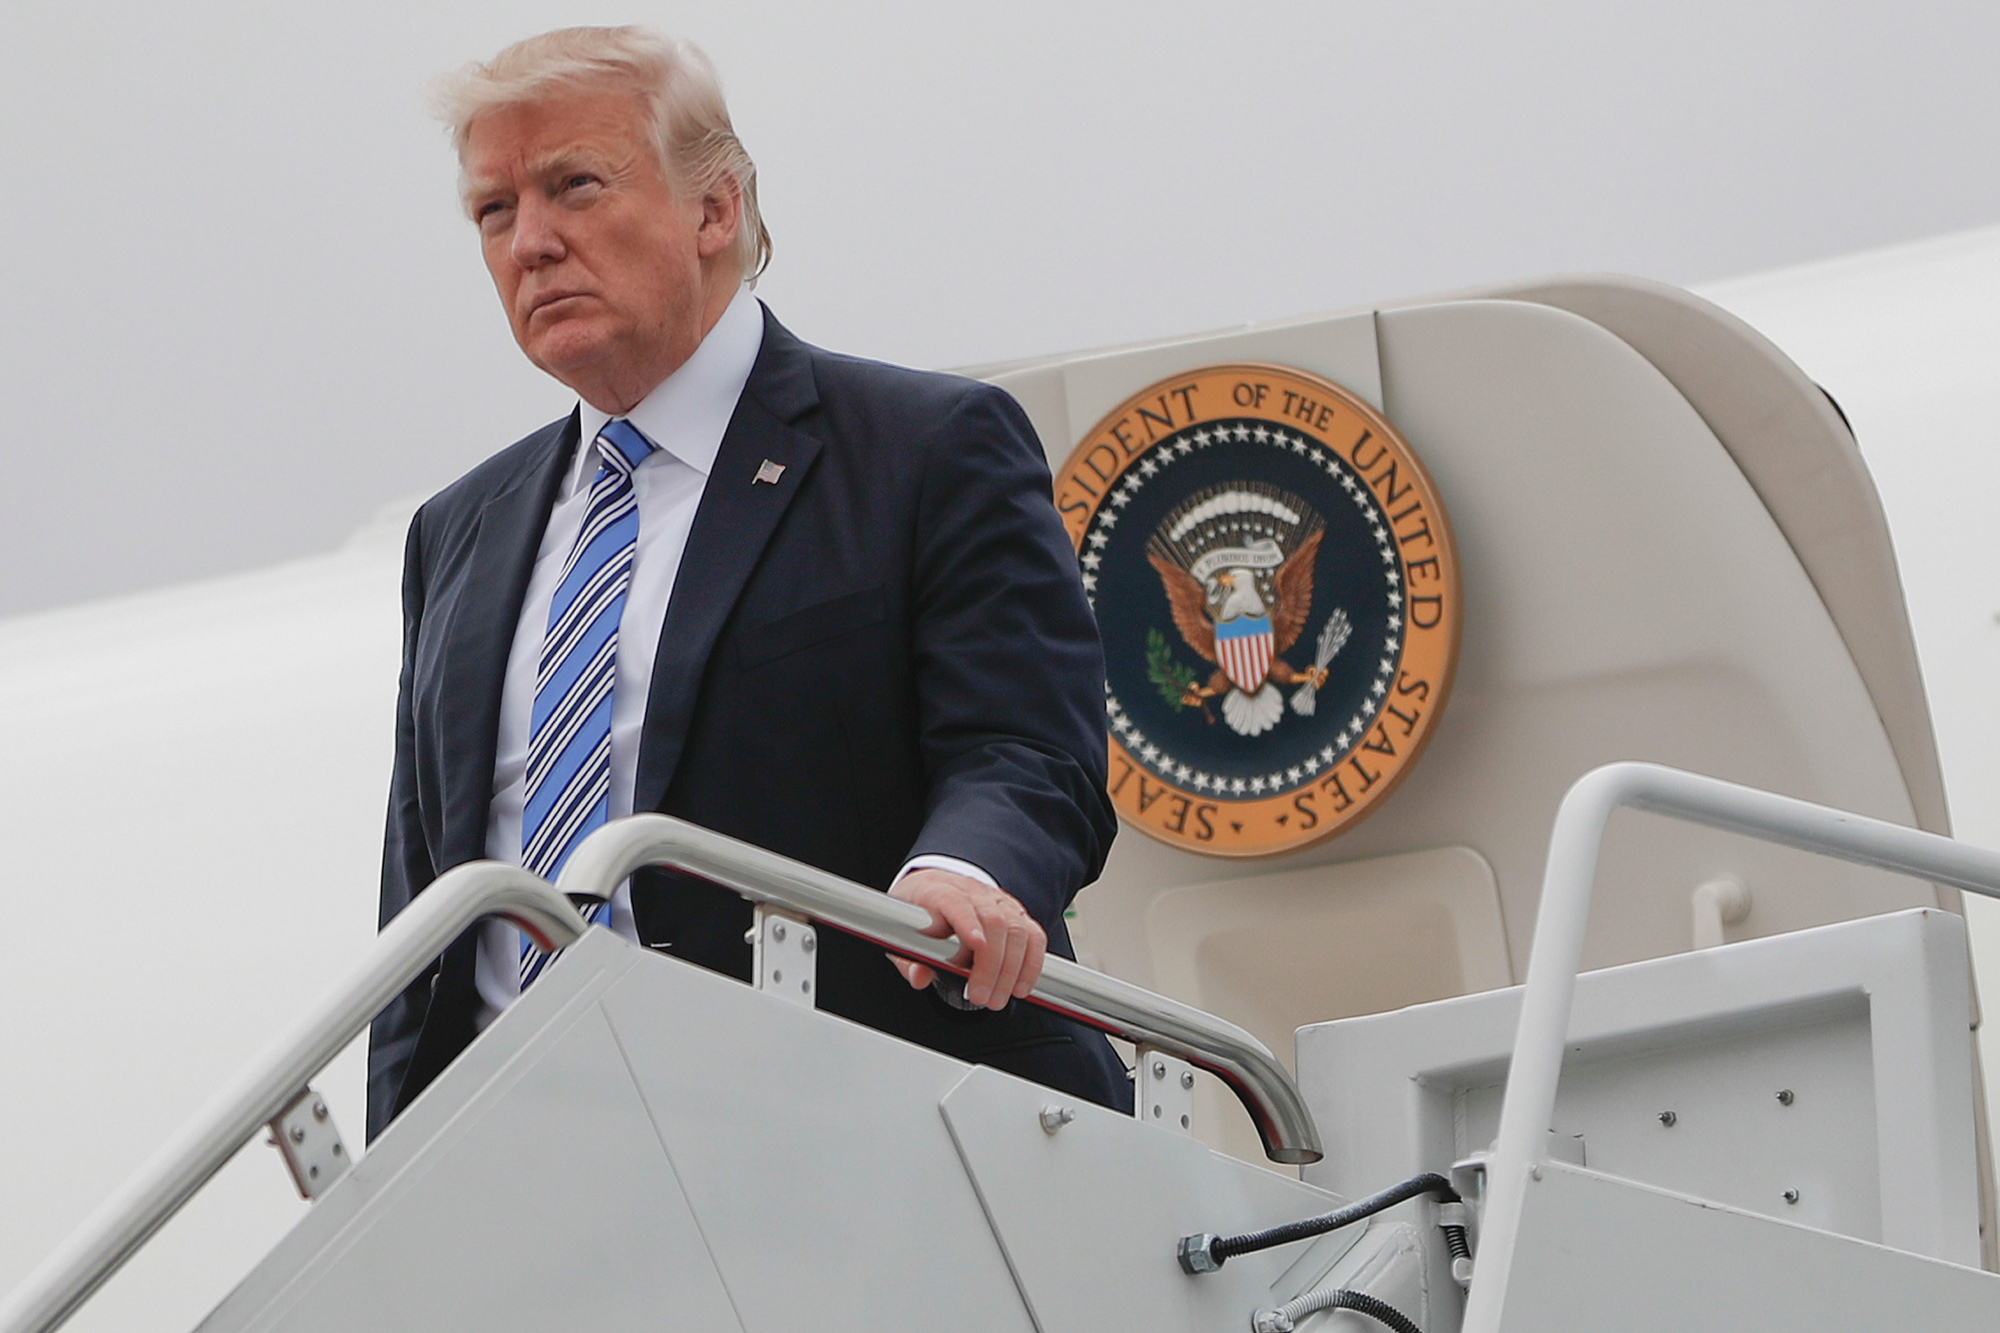 U.S. President Donald Trump walks down the stairs of Air Force One during his arrival at Andrews Air Force Base, Md., on May 13.
